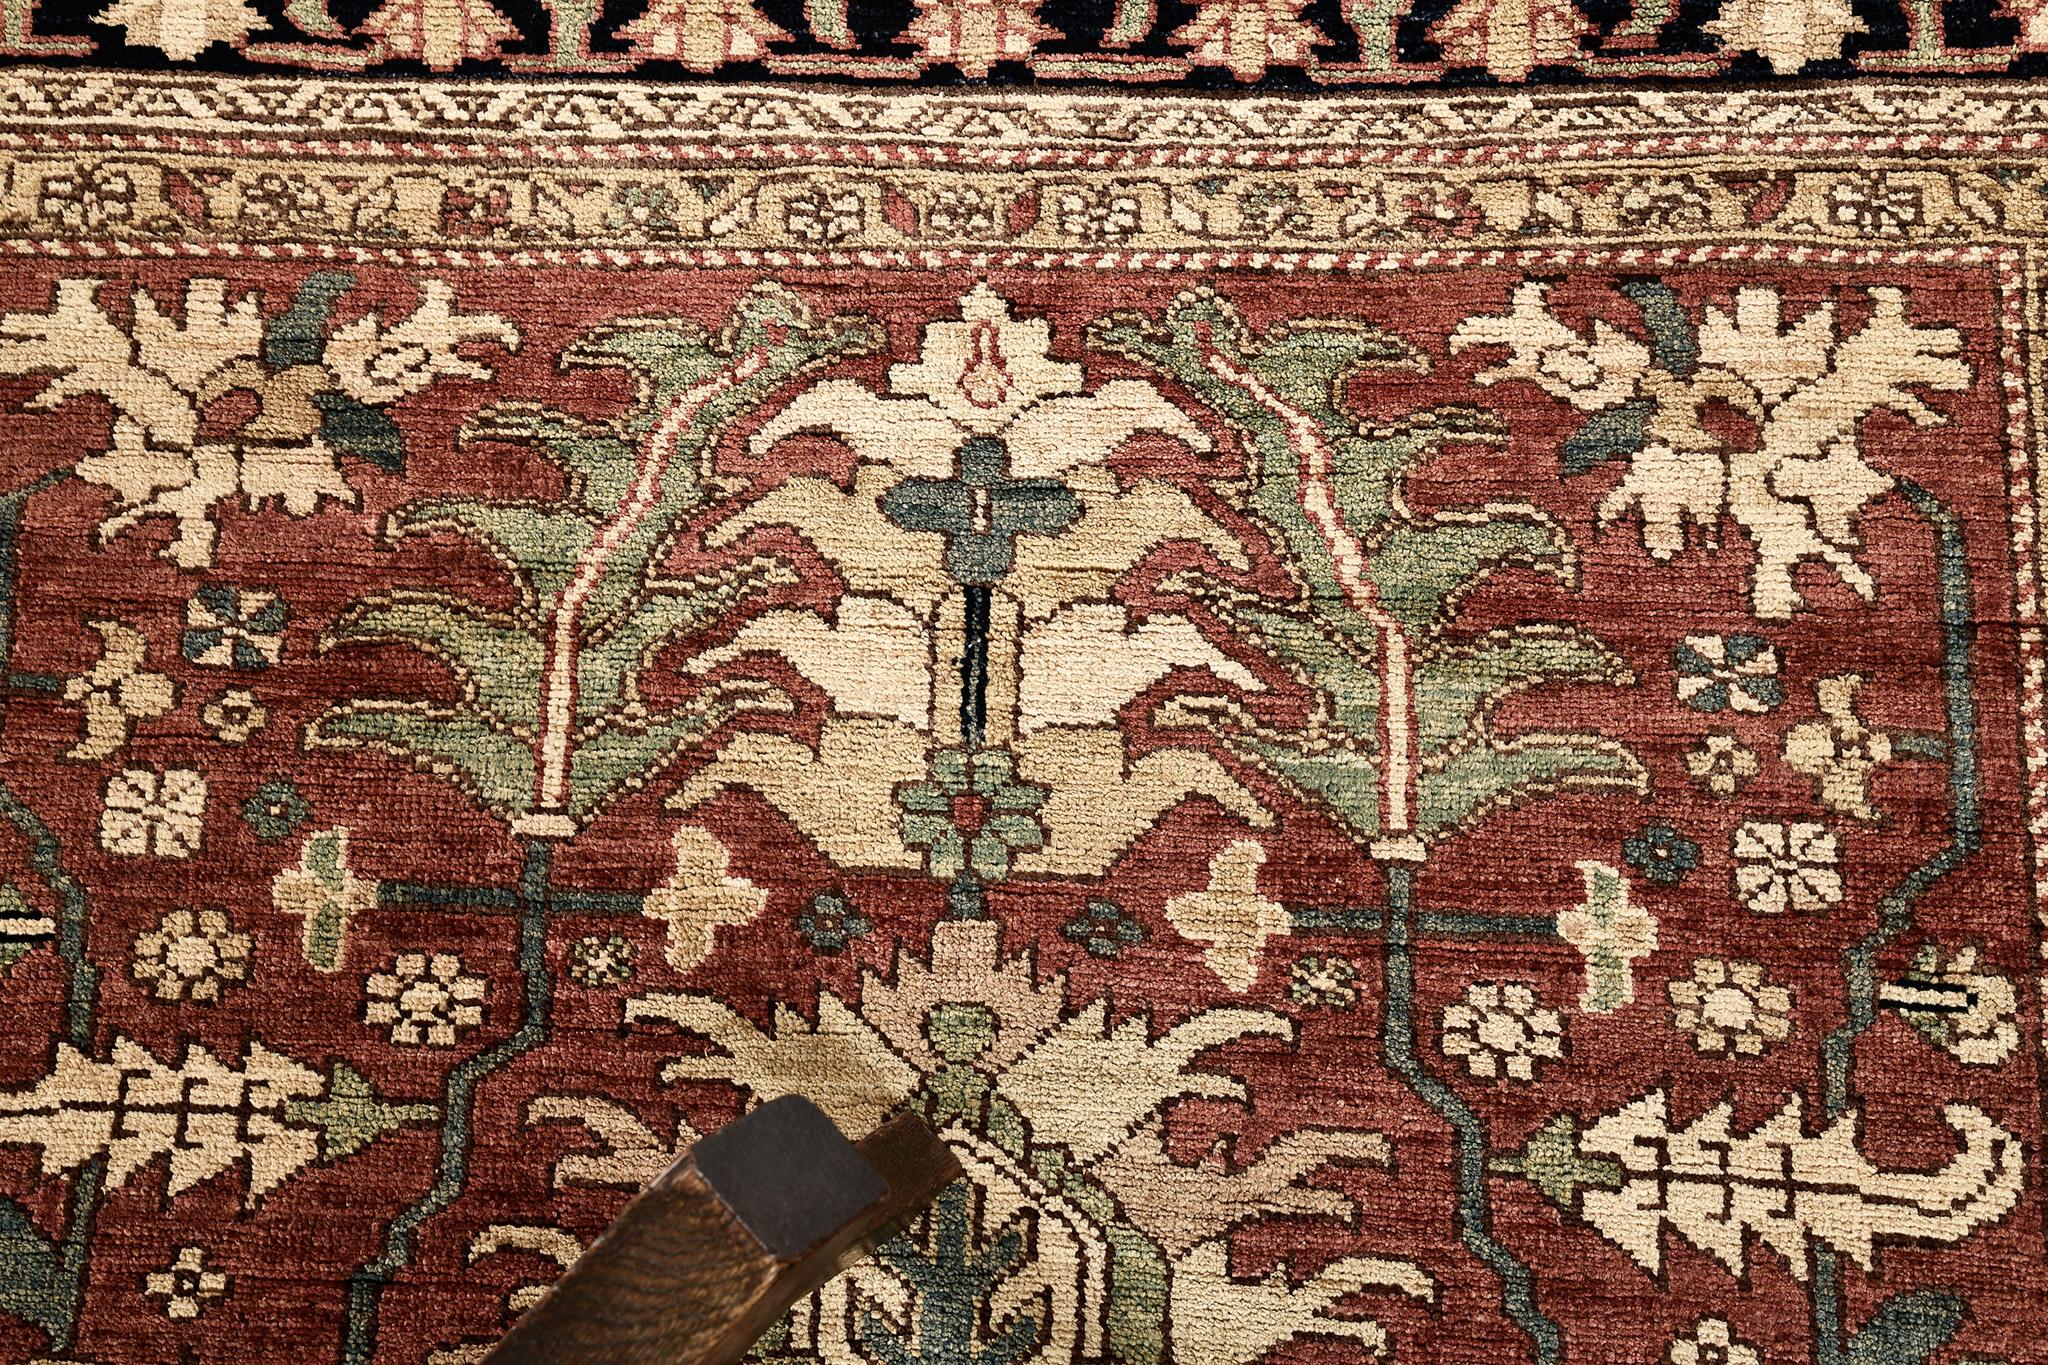 Series of medallions, green leafy ornaments, and florid elements are reflected through dazzling velvet red field. The borders are beautifully hand-woven that was made using vegetable dye to form an amazing Serapi Design Rug. Truly a creation that